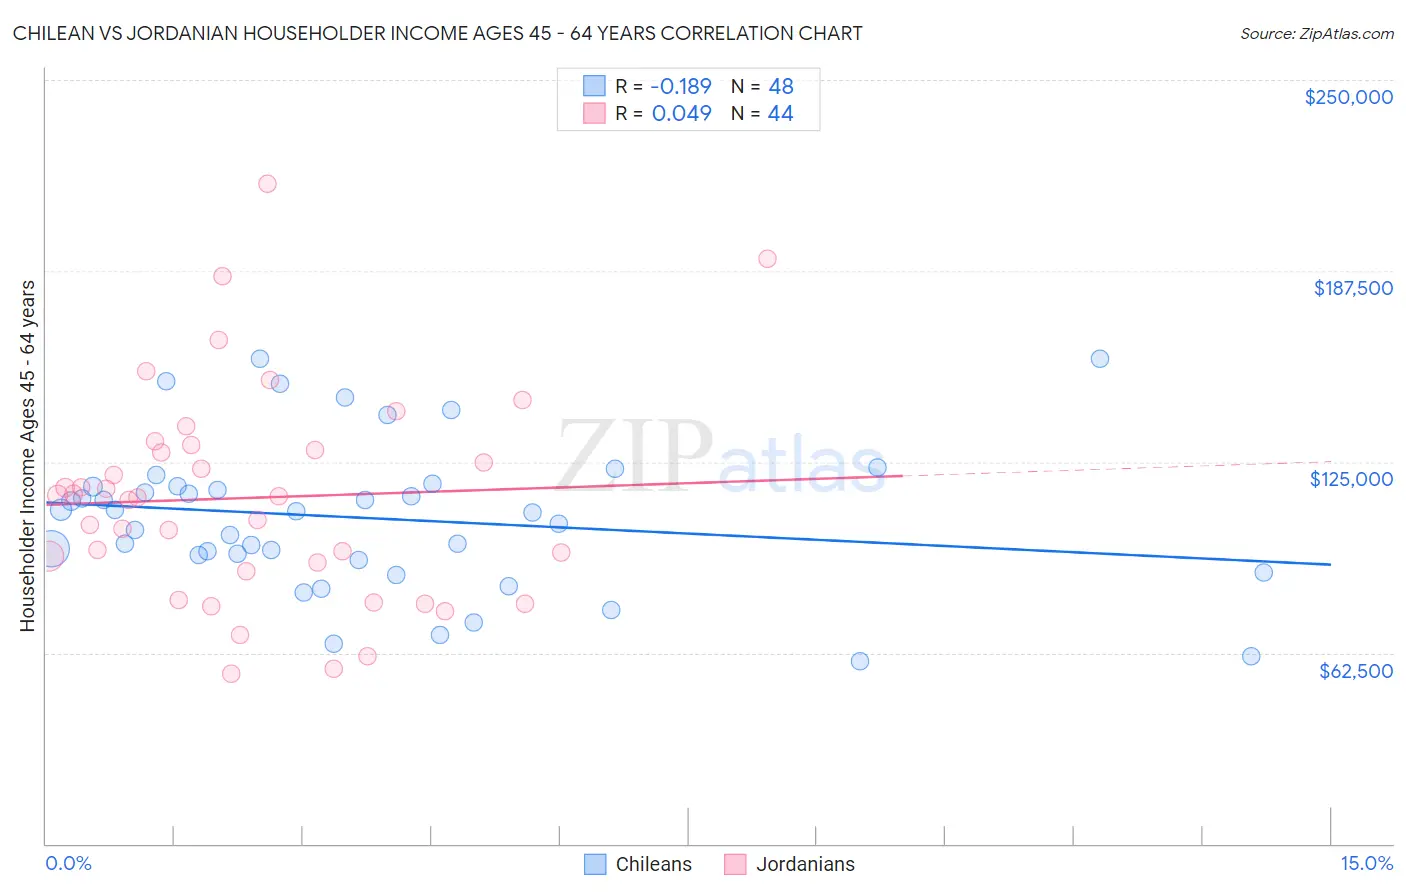 Chilean vs Jordanian Householder Income Ages 45 - 64 years